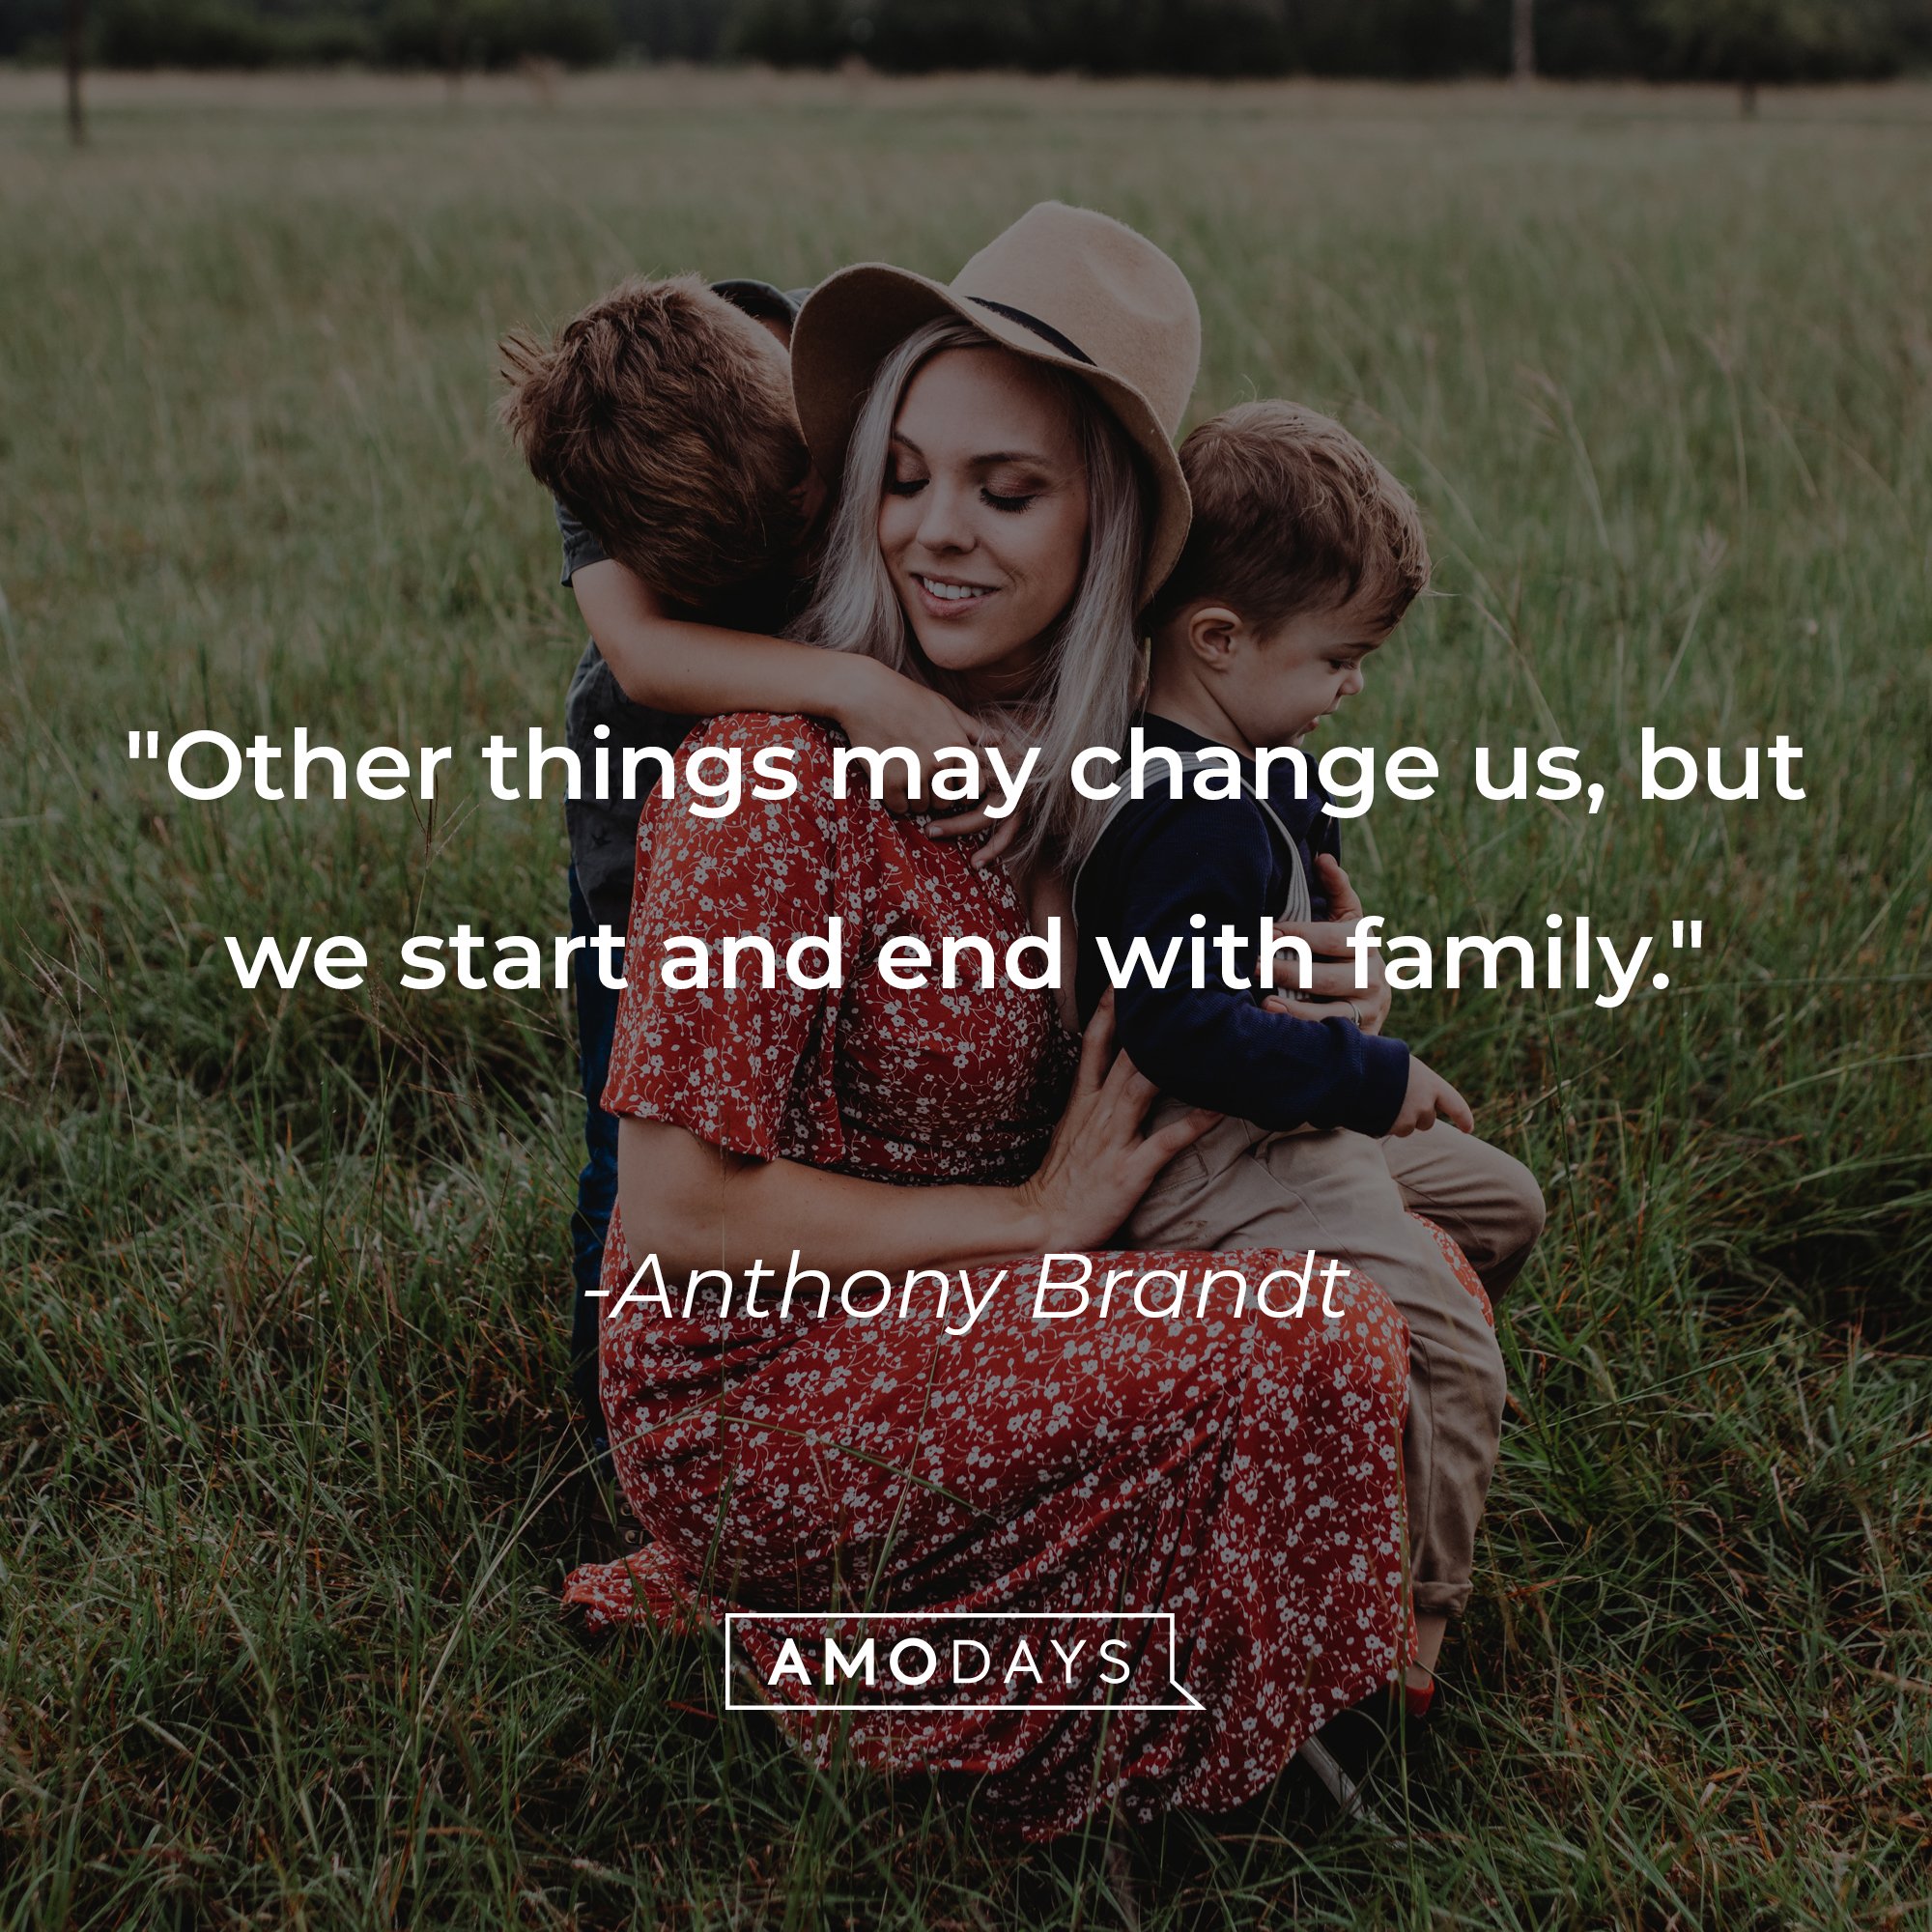 Anthony Brandt's quote: "Other things may change us, but we start and end with family." | Image: AmoDays